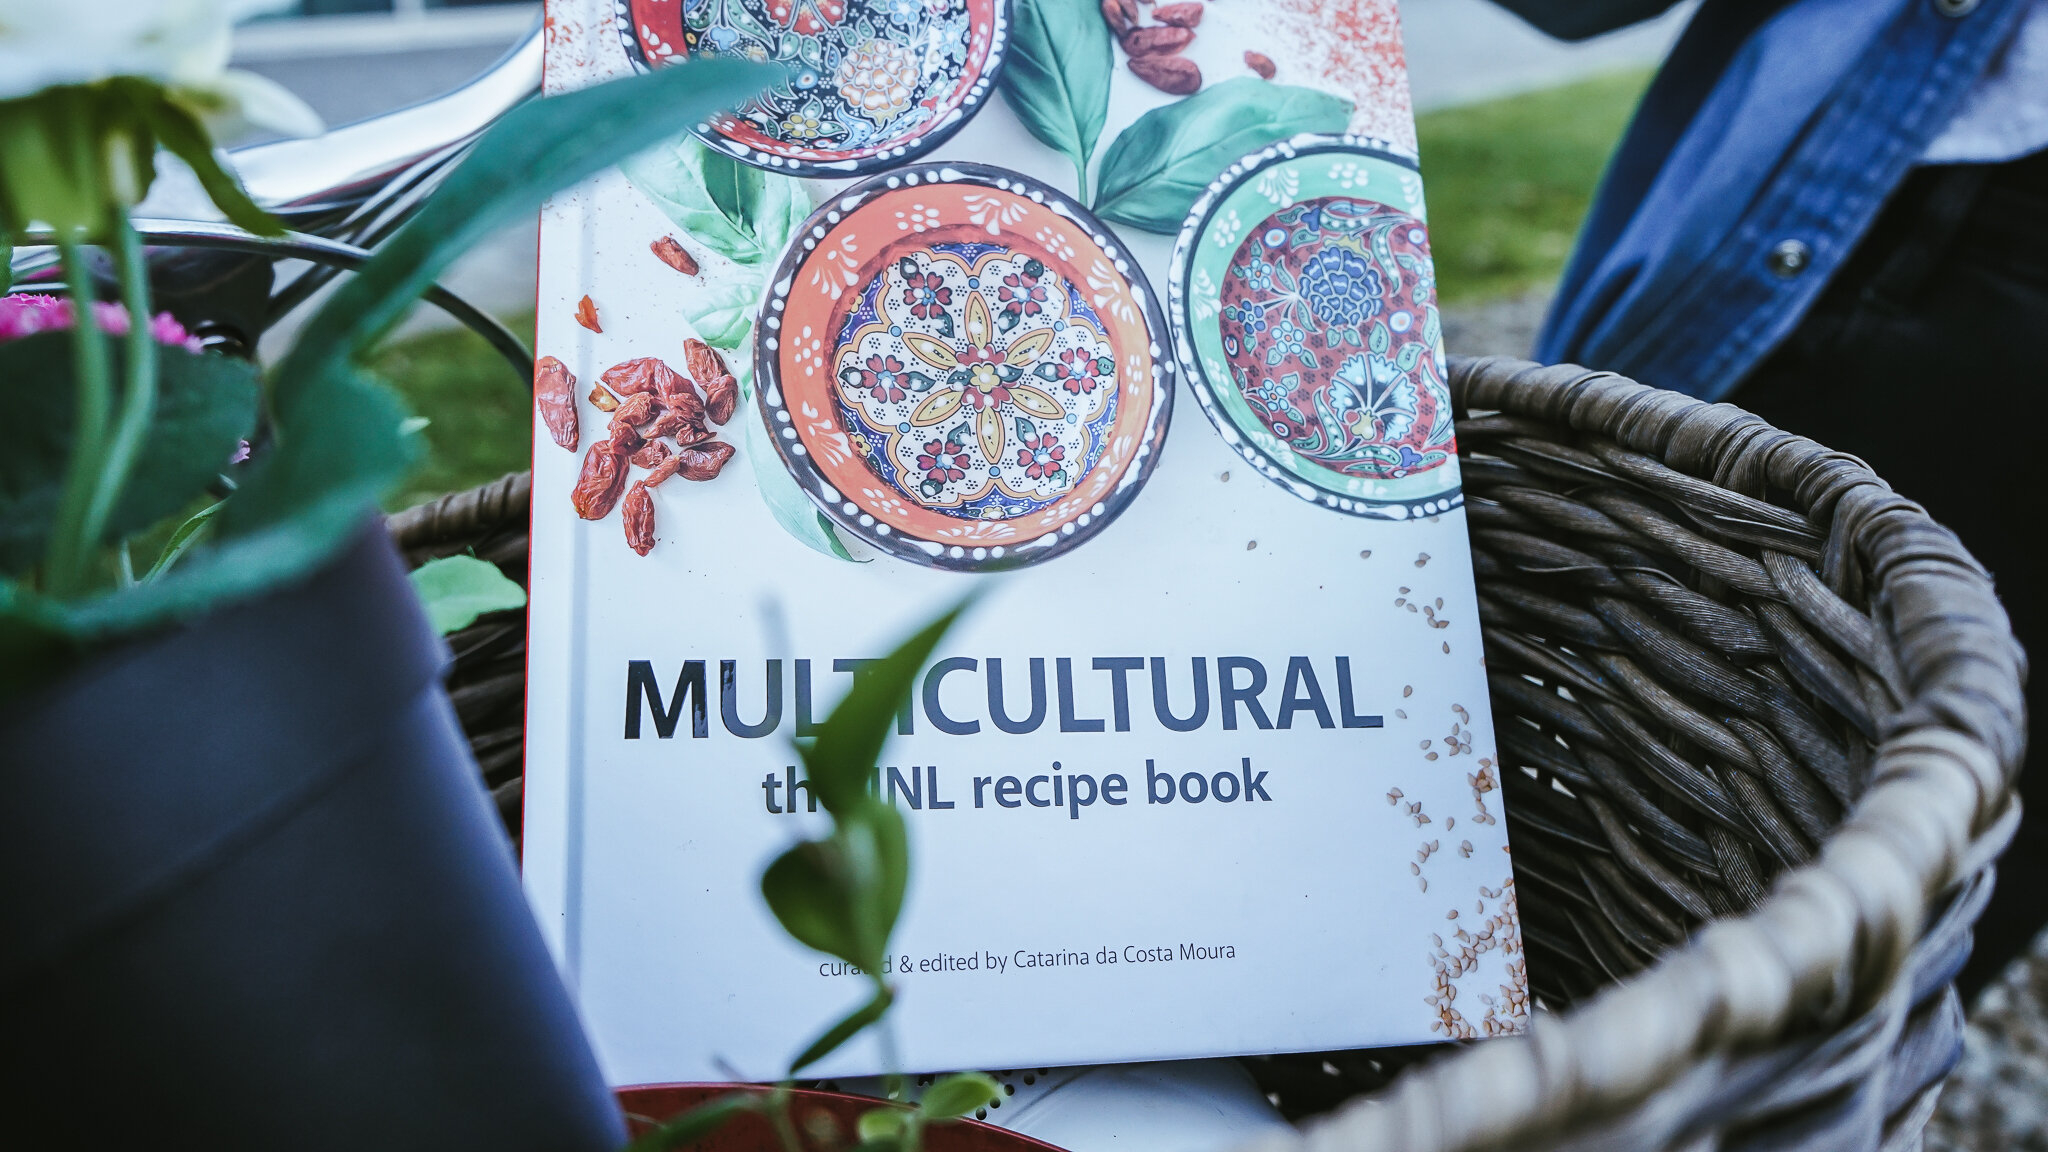 Multicultural, INL Recipe Book launched on World Food Day